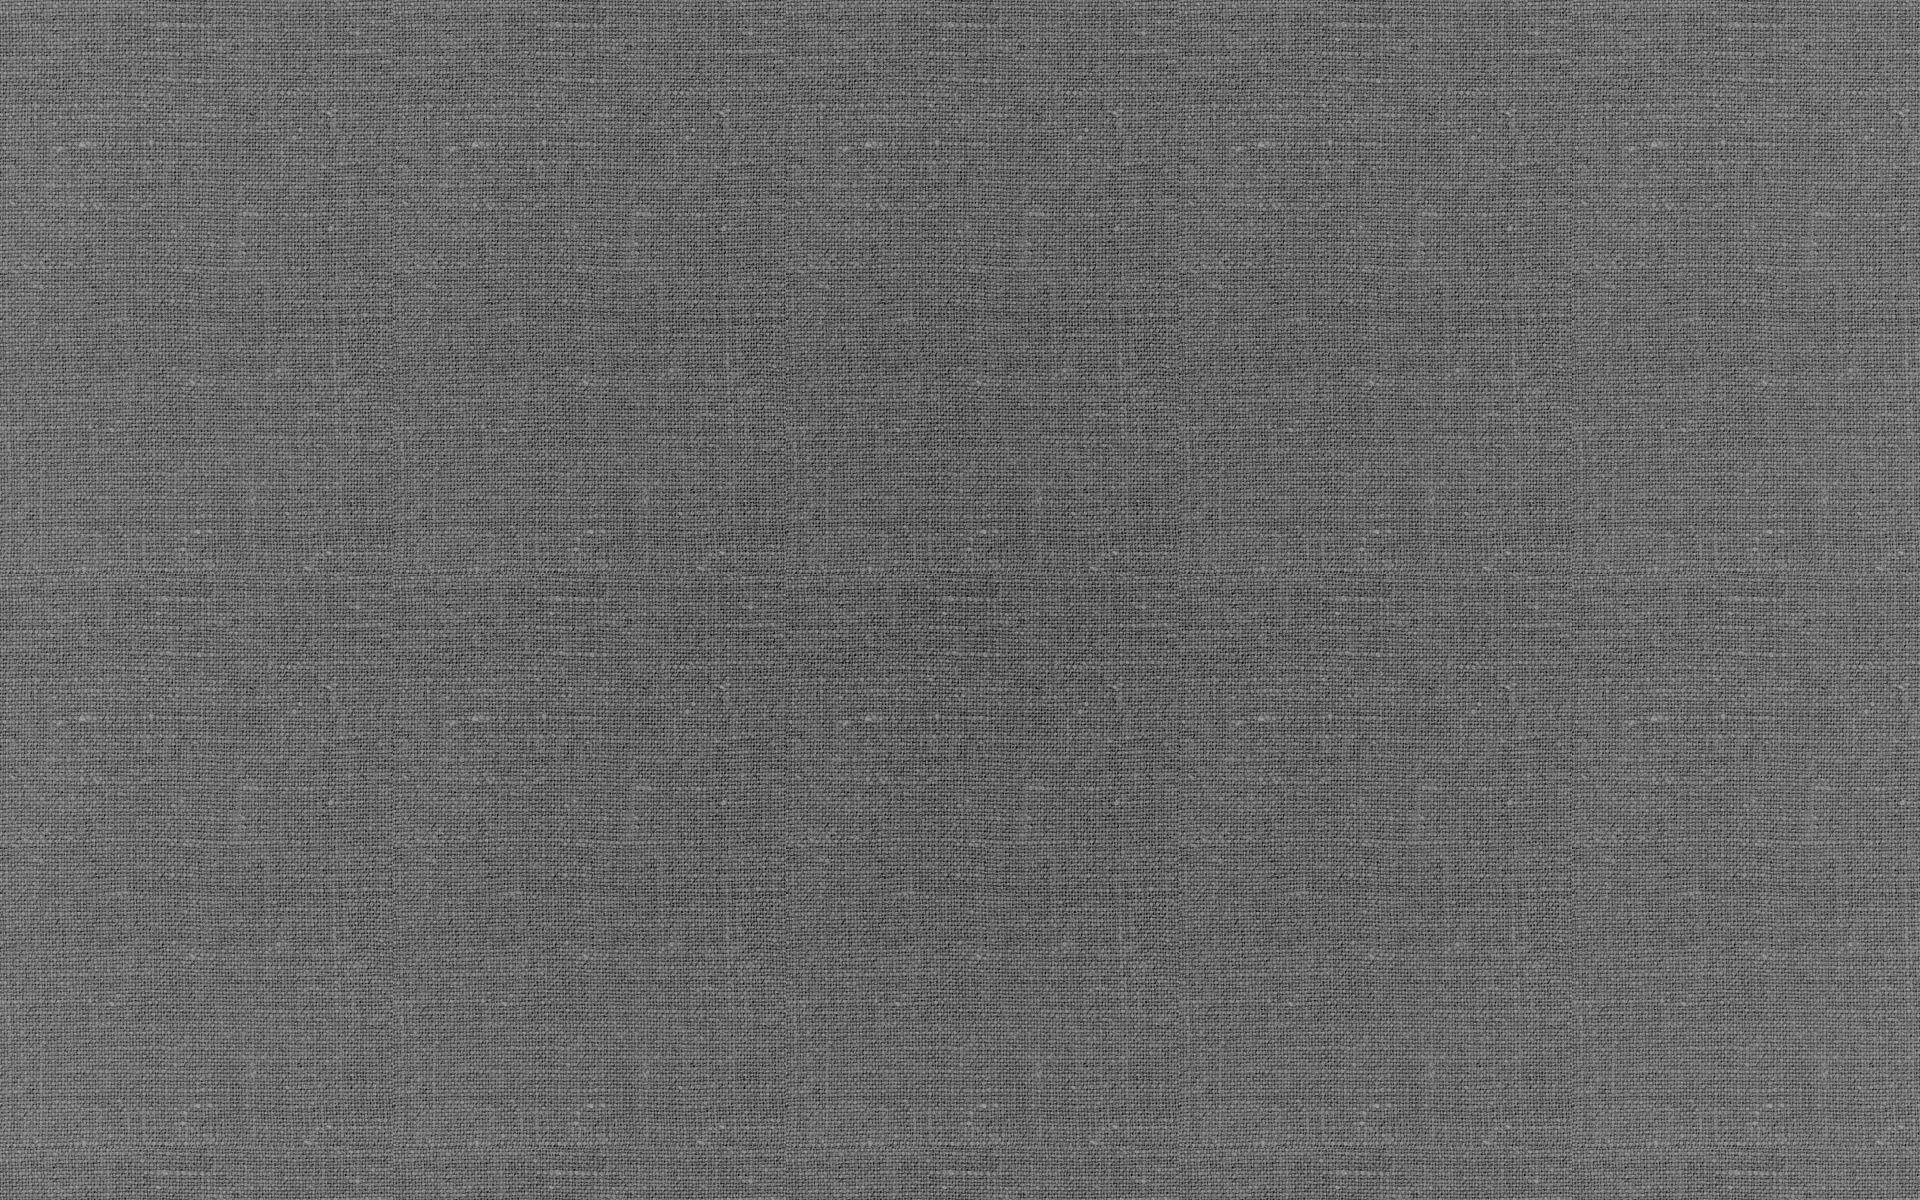 Free HD grey, grid, textures, texture, lines, surface